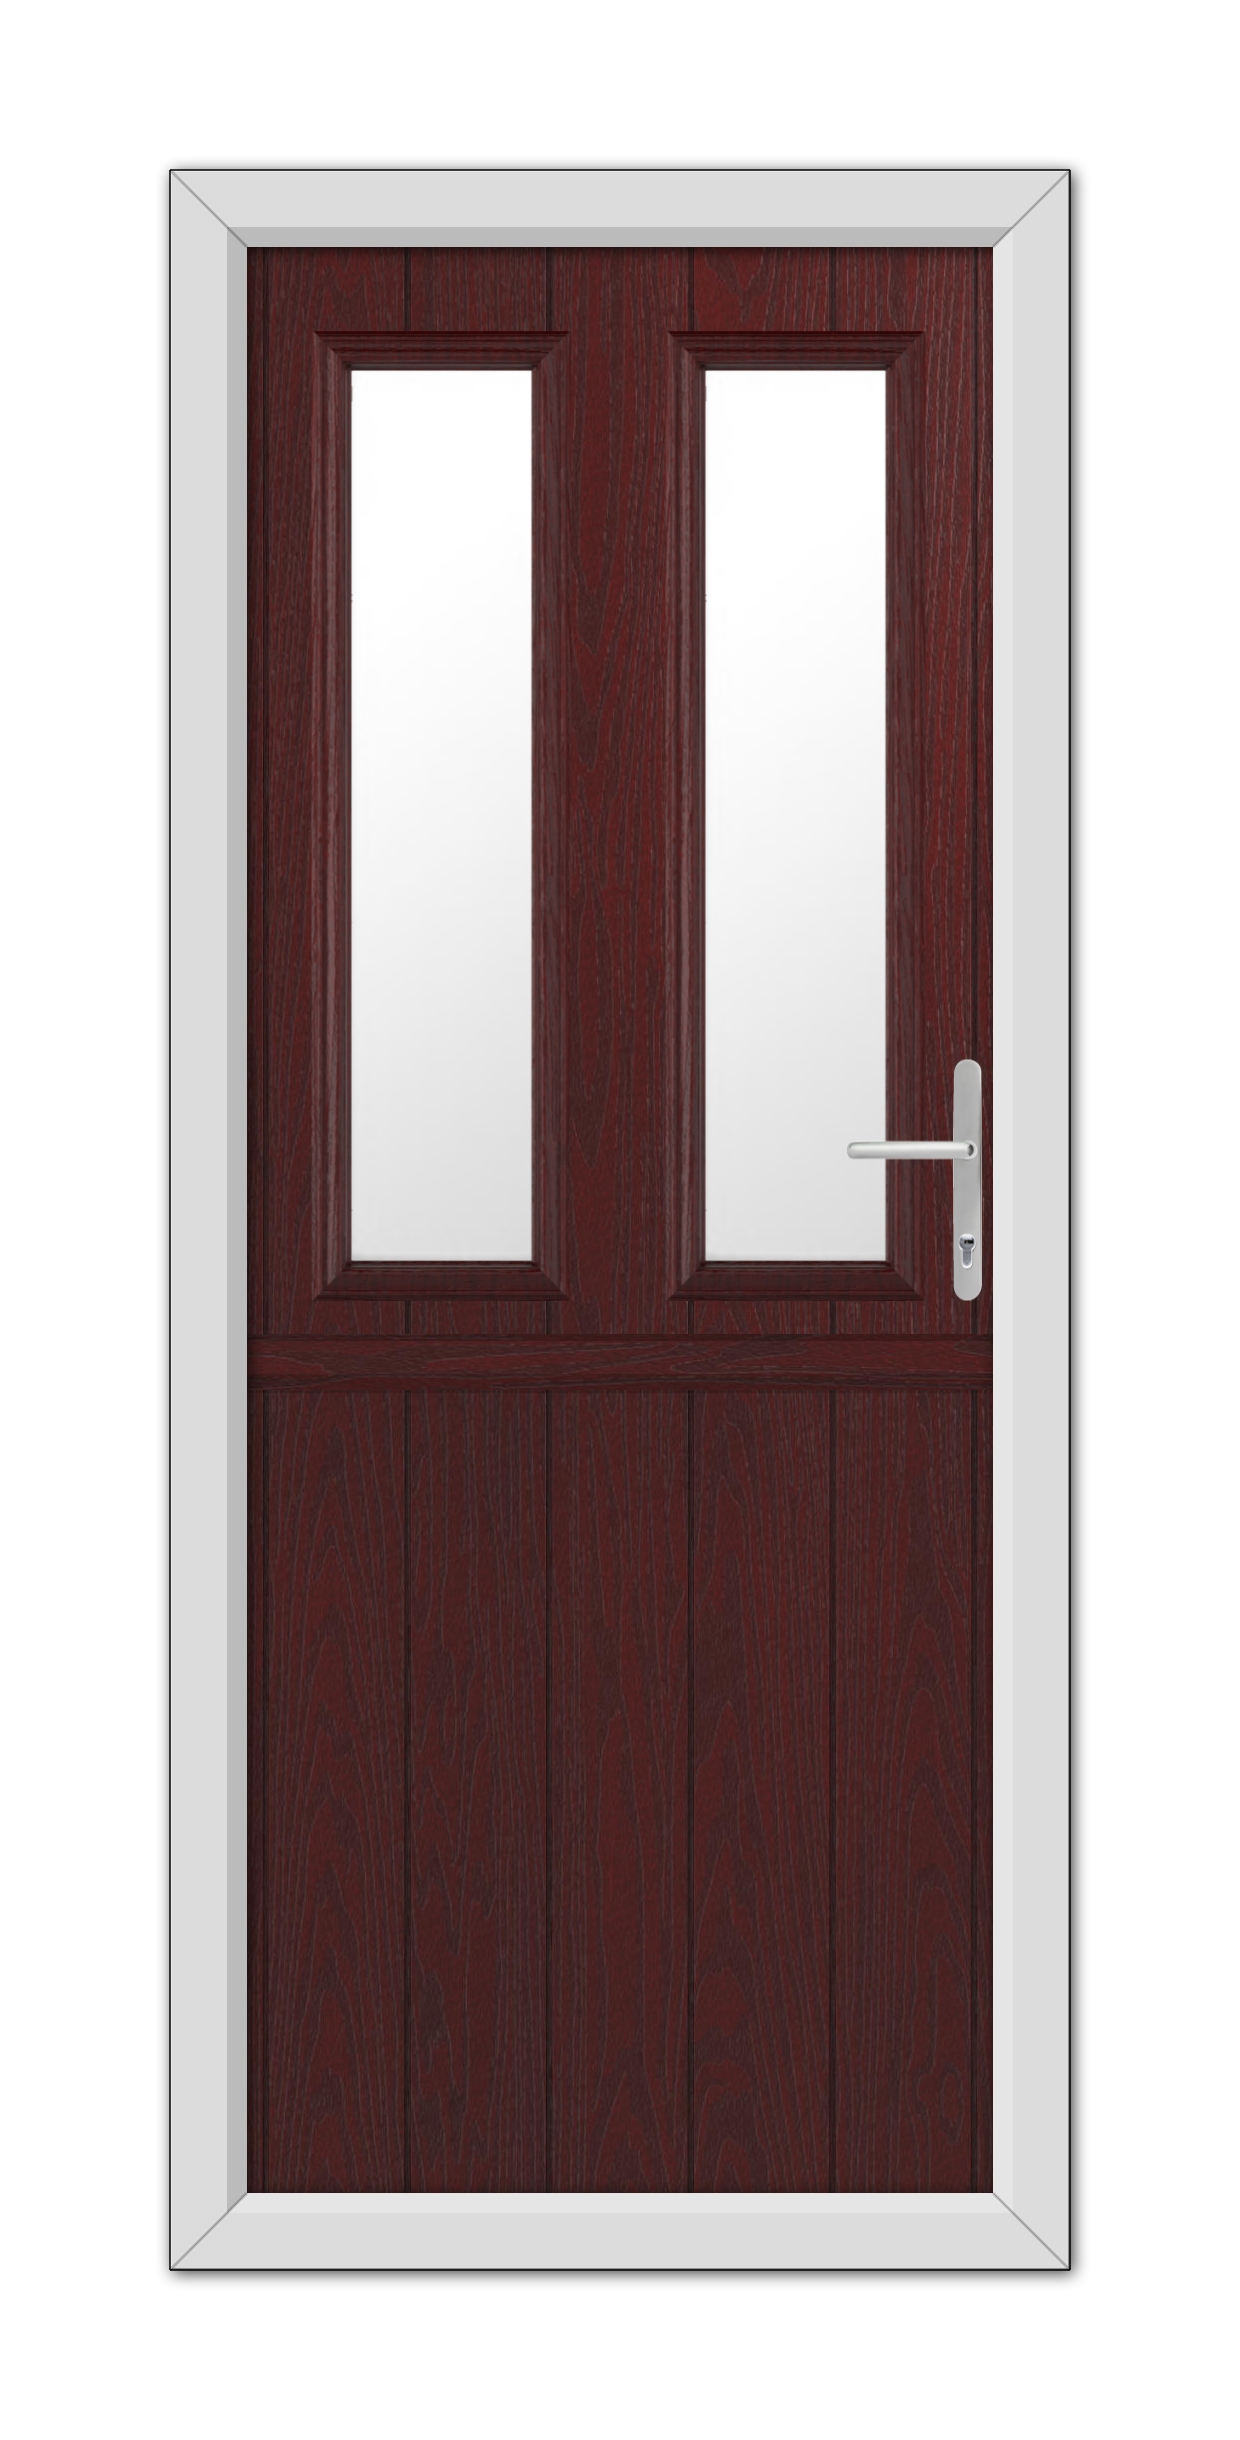 A Rosewood Wellington Stable Composite Door 48mm Timber Core with a metallic handle, featuring two vertical rectangular glass panels, set within a white frame.